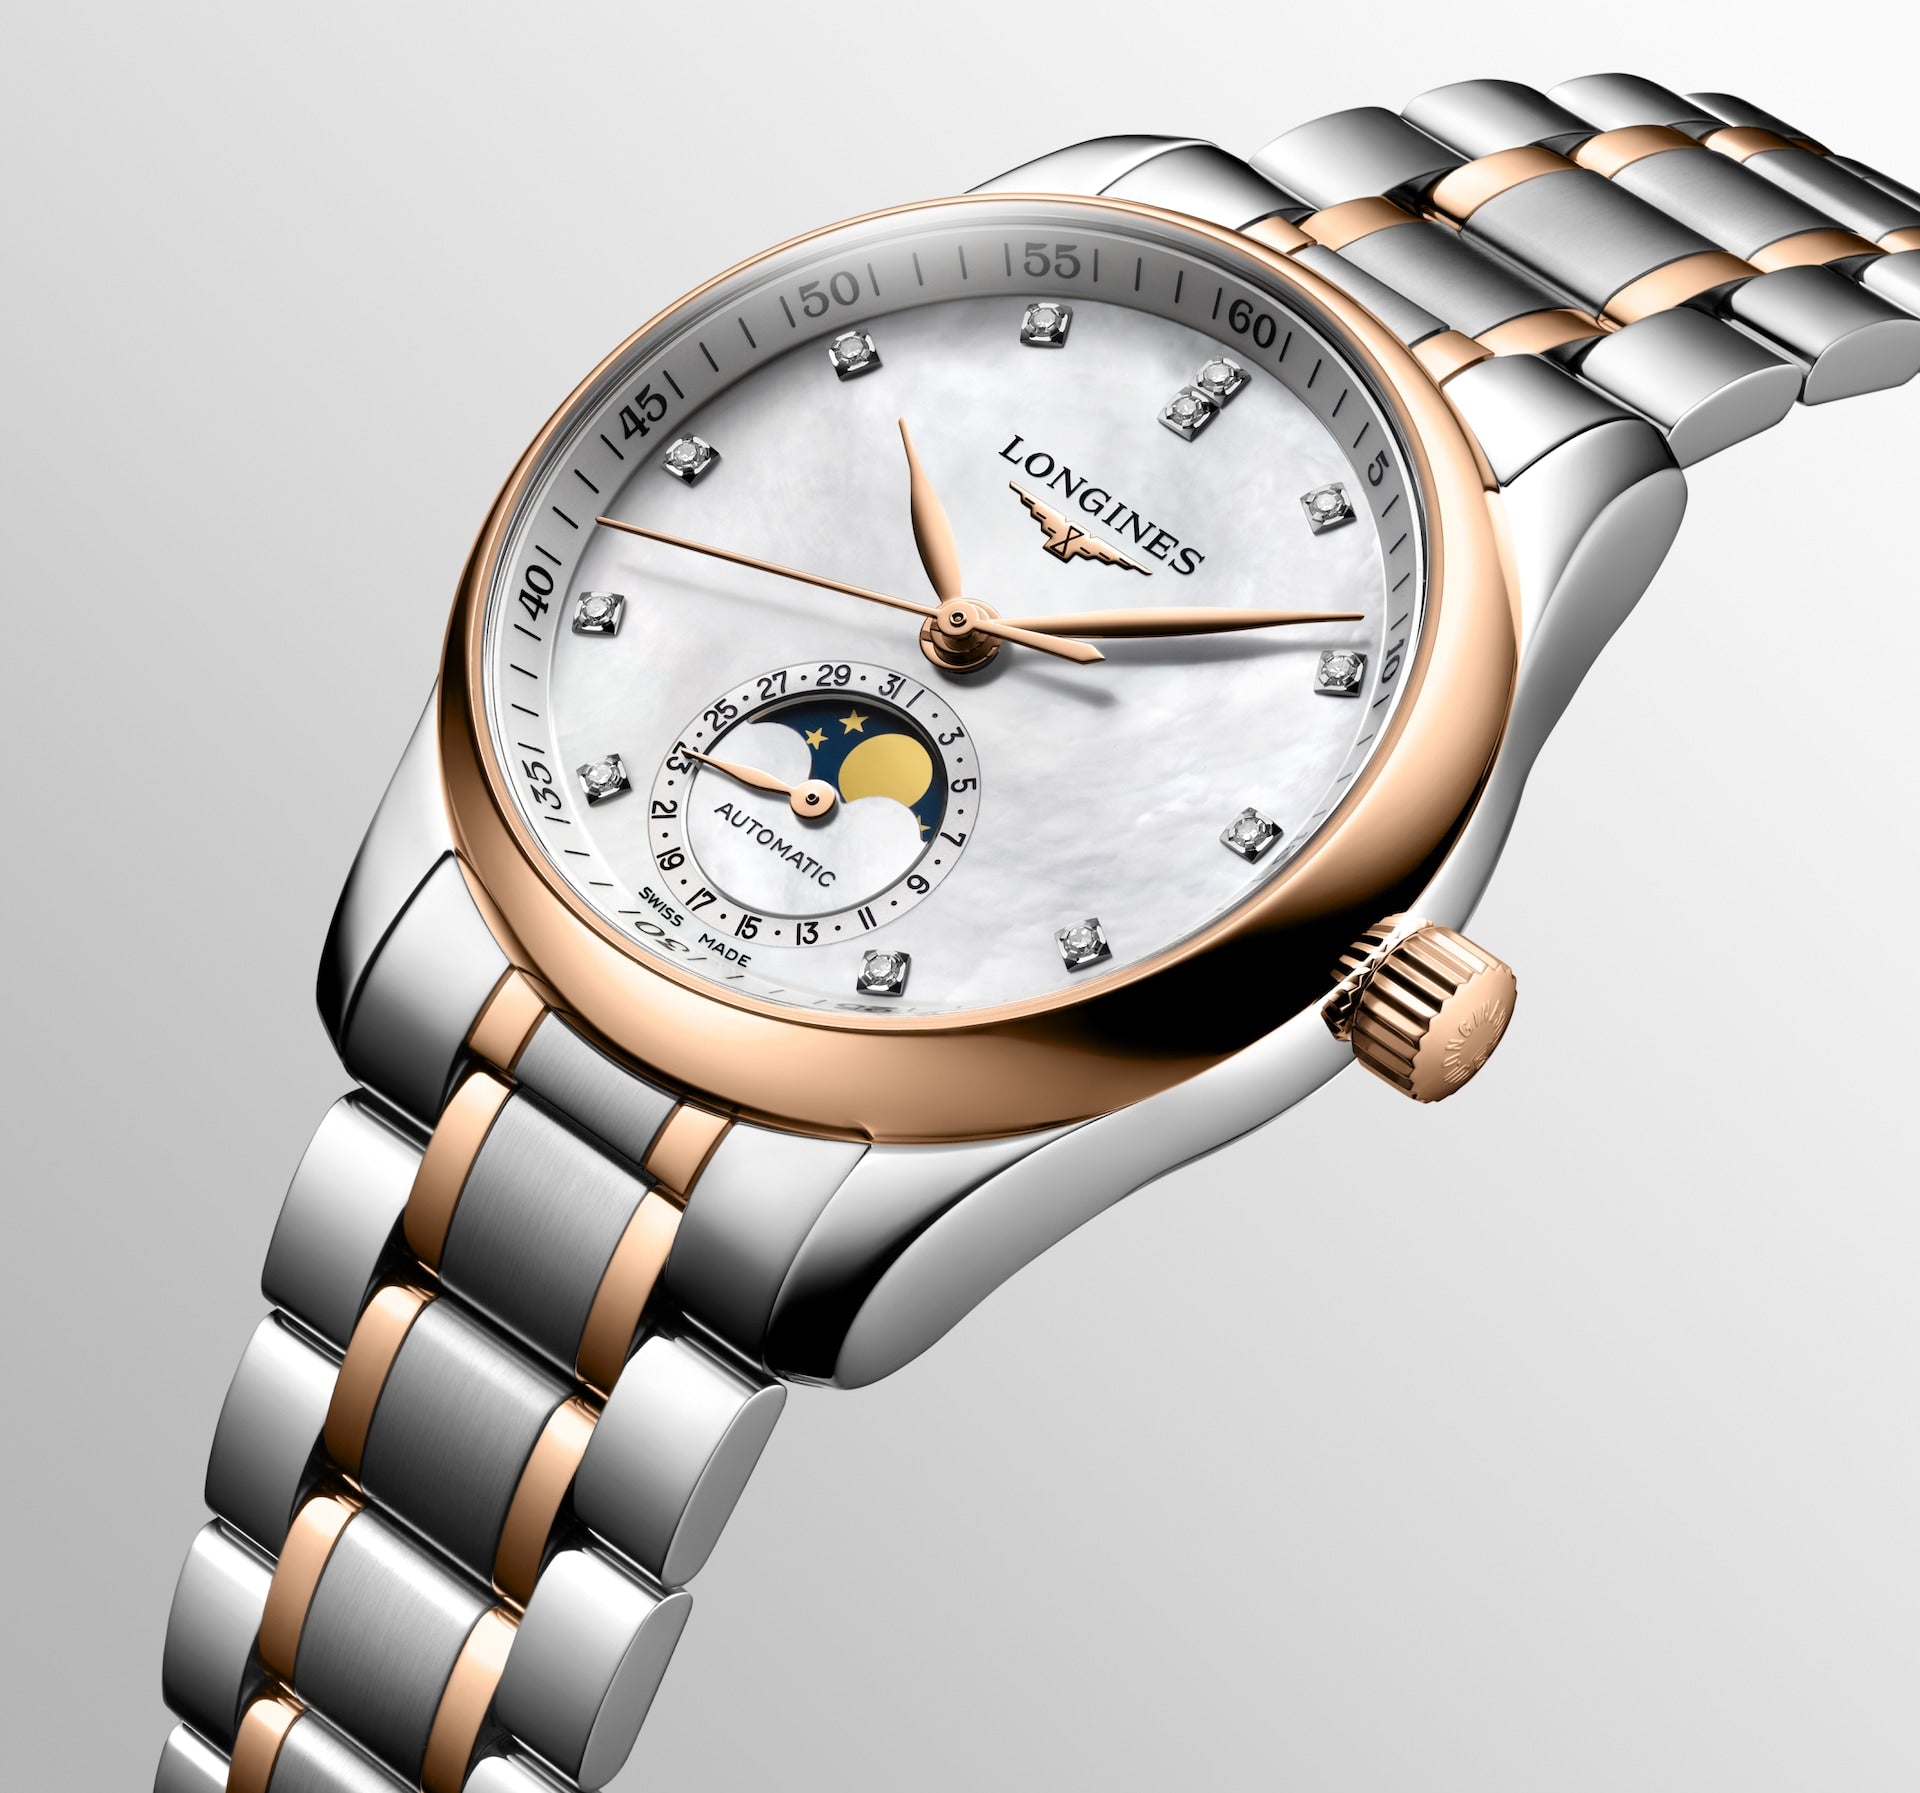 THE LONGINES MASTER COLLECTIONL2.409.5.89.7 L2.409.5.89.7